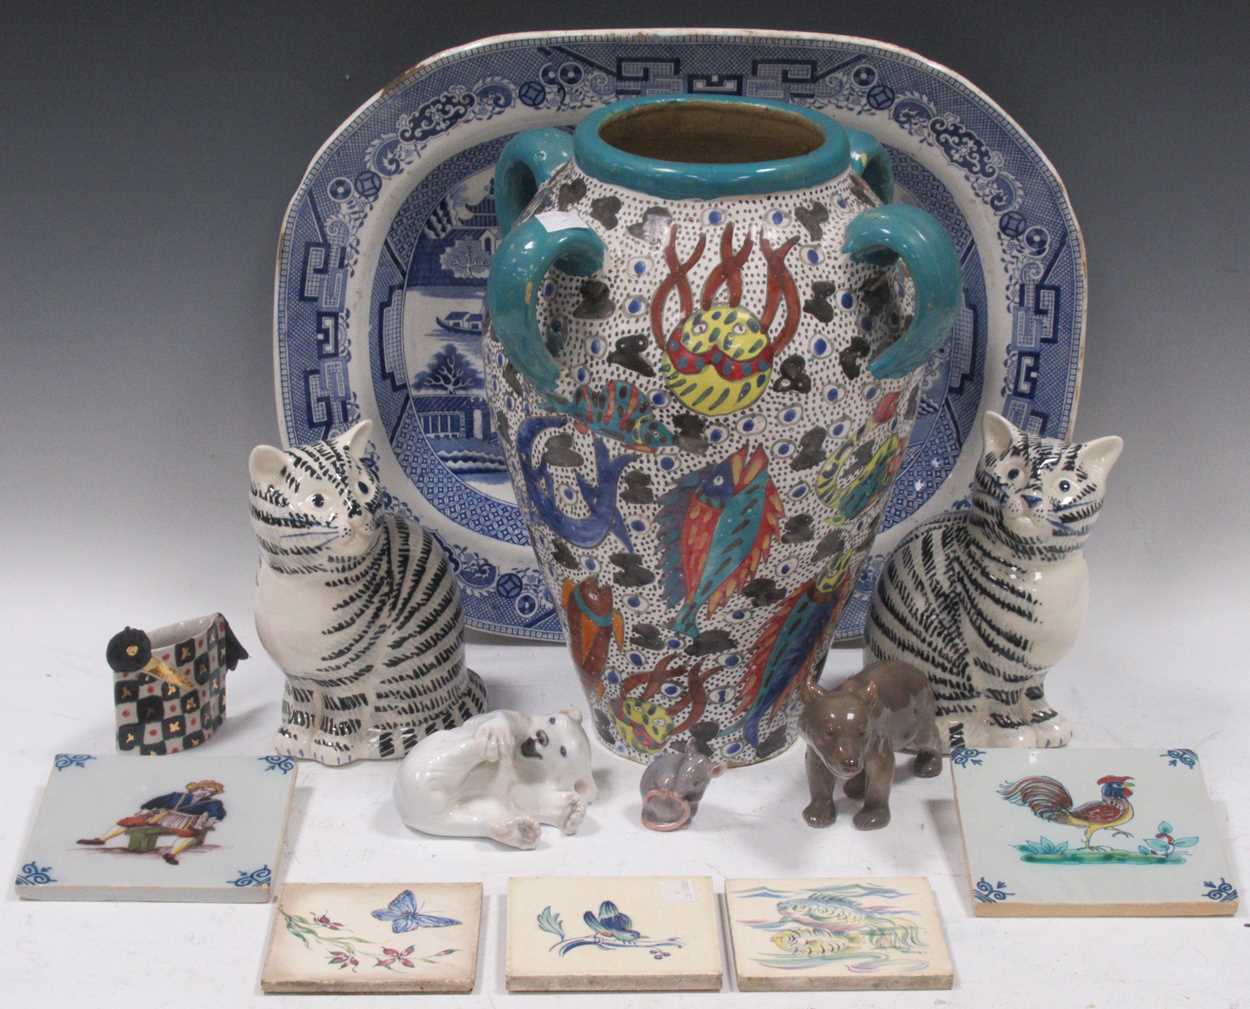 A Royal Copenhagen polar bear, a Bing & Grondahl brown bear and rat, together with two ceramic